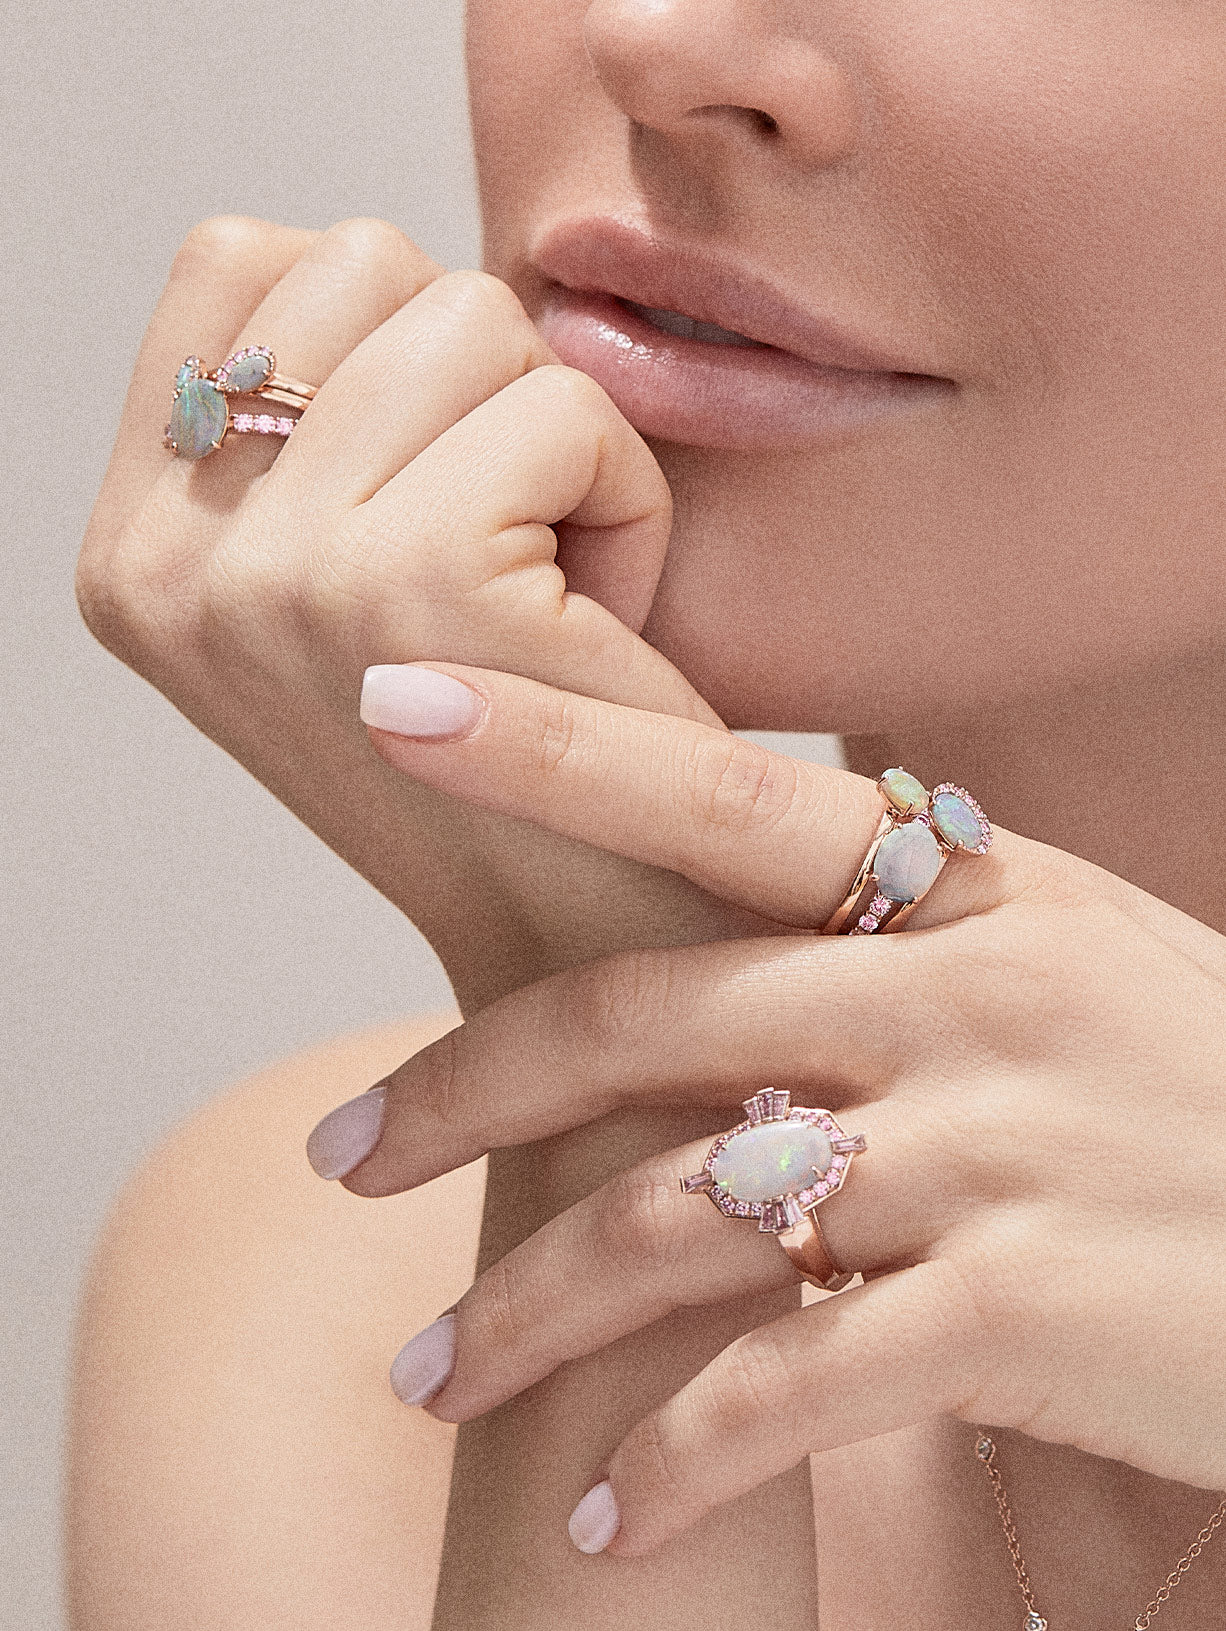 Argyle Pink™ Diamond and Opal Stacking Ring - Pink Diamonds, J FINE - J Fine, Rings - Pink Diamond Jewelry, argyle-pink™-diamond-and-opal-stacking-ring-by-j-fine-5 - Argyle Pink Diamonds